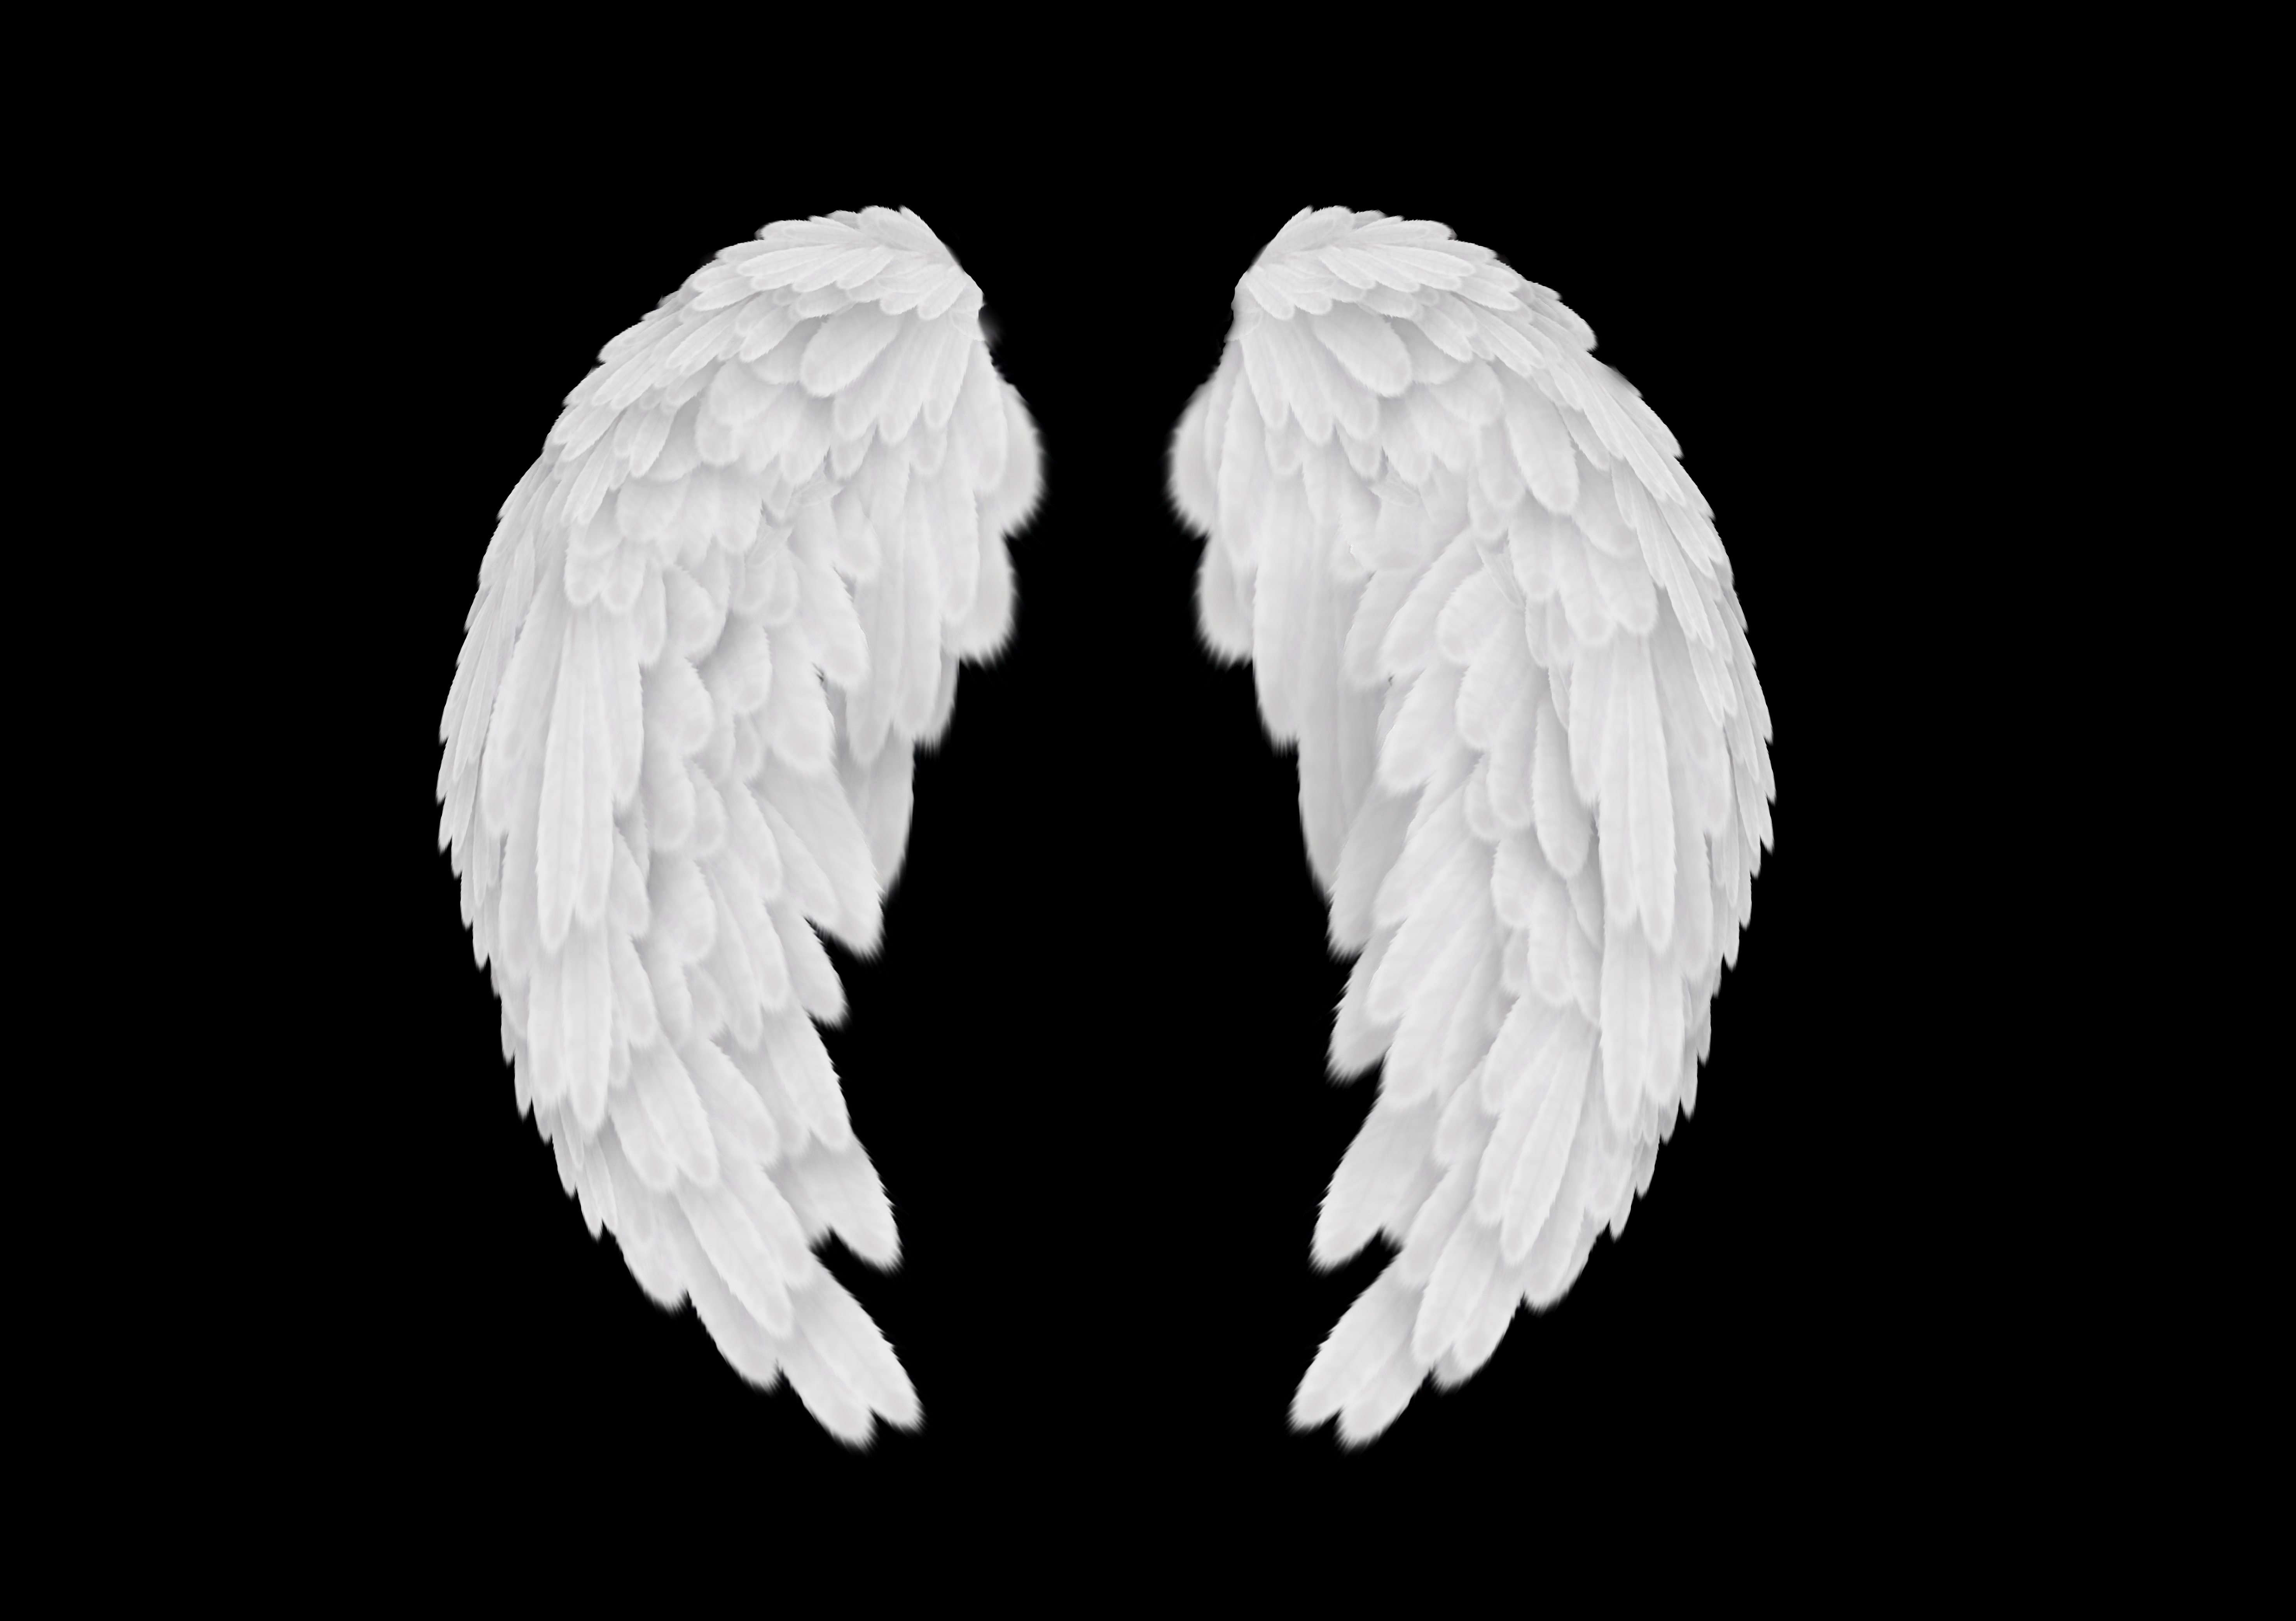 Angel wings PSD by Mithos-2000 on DeviantArt